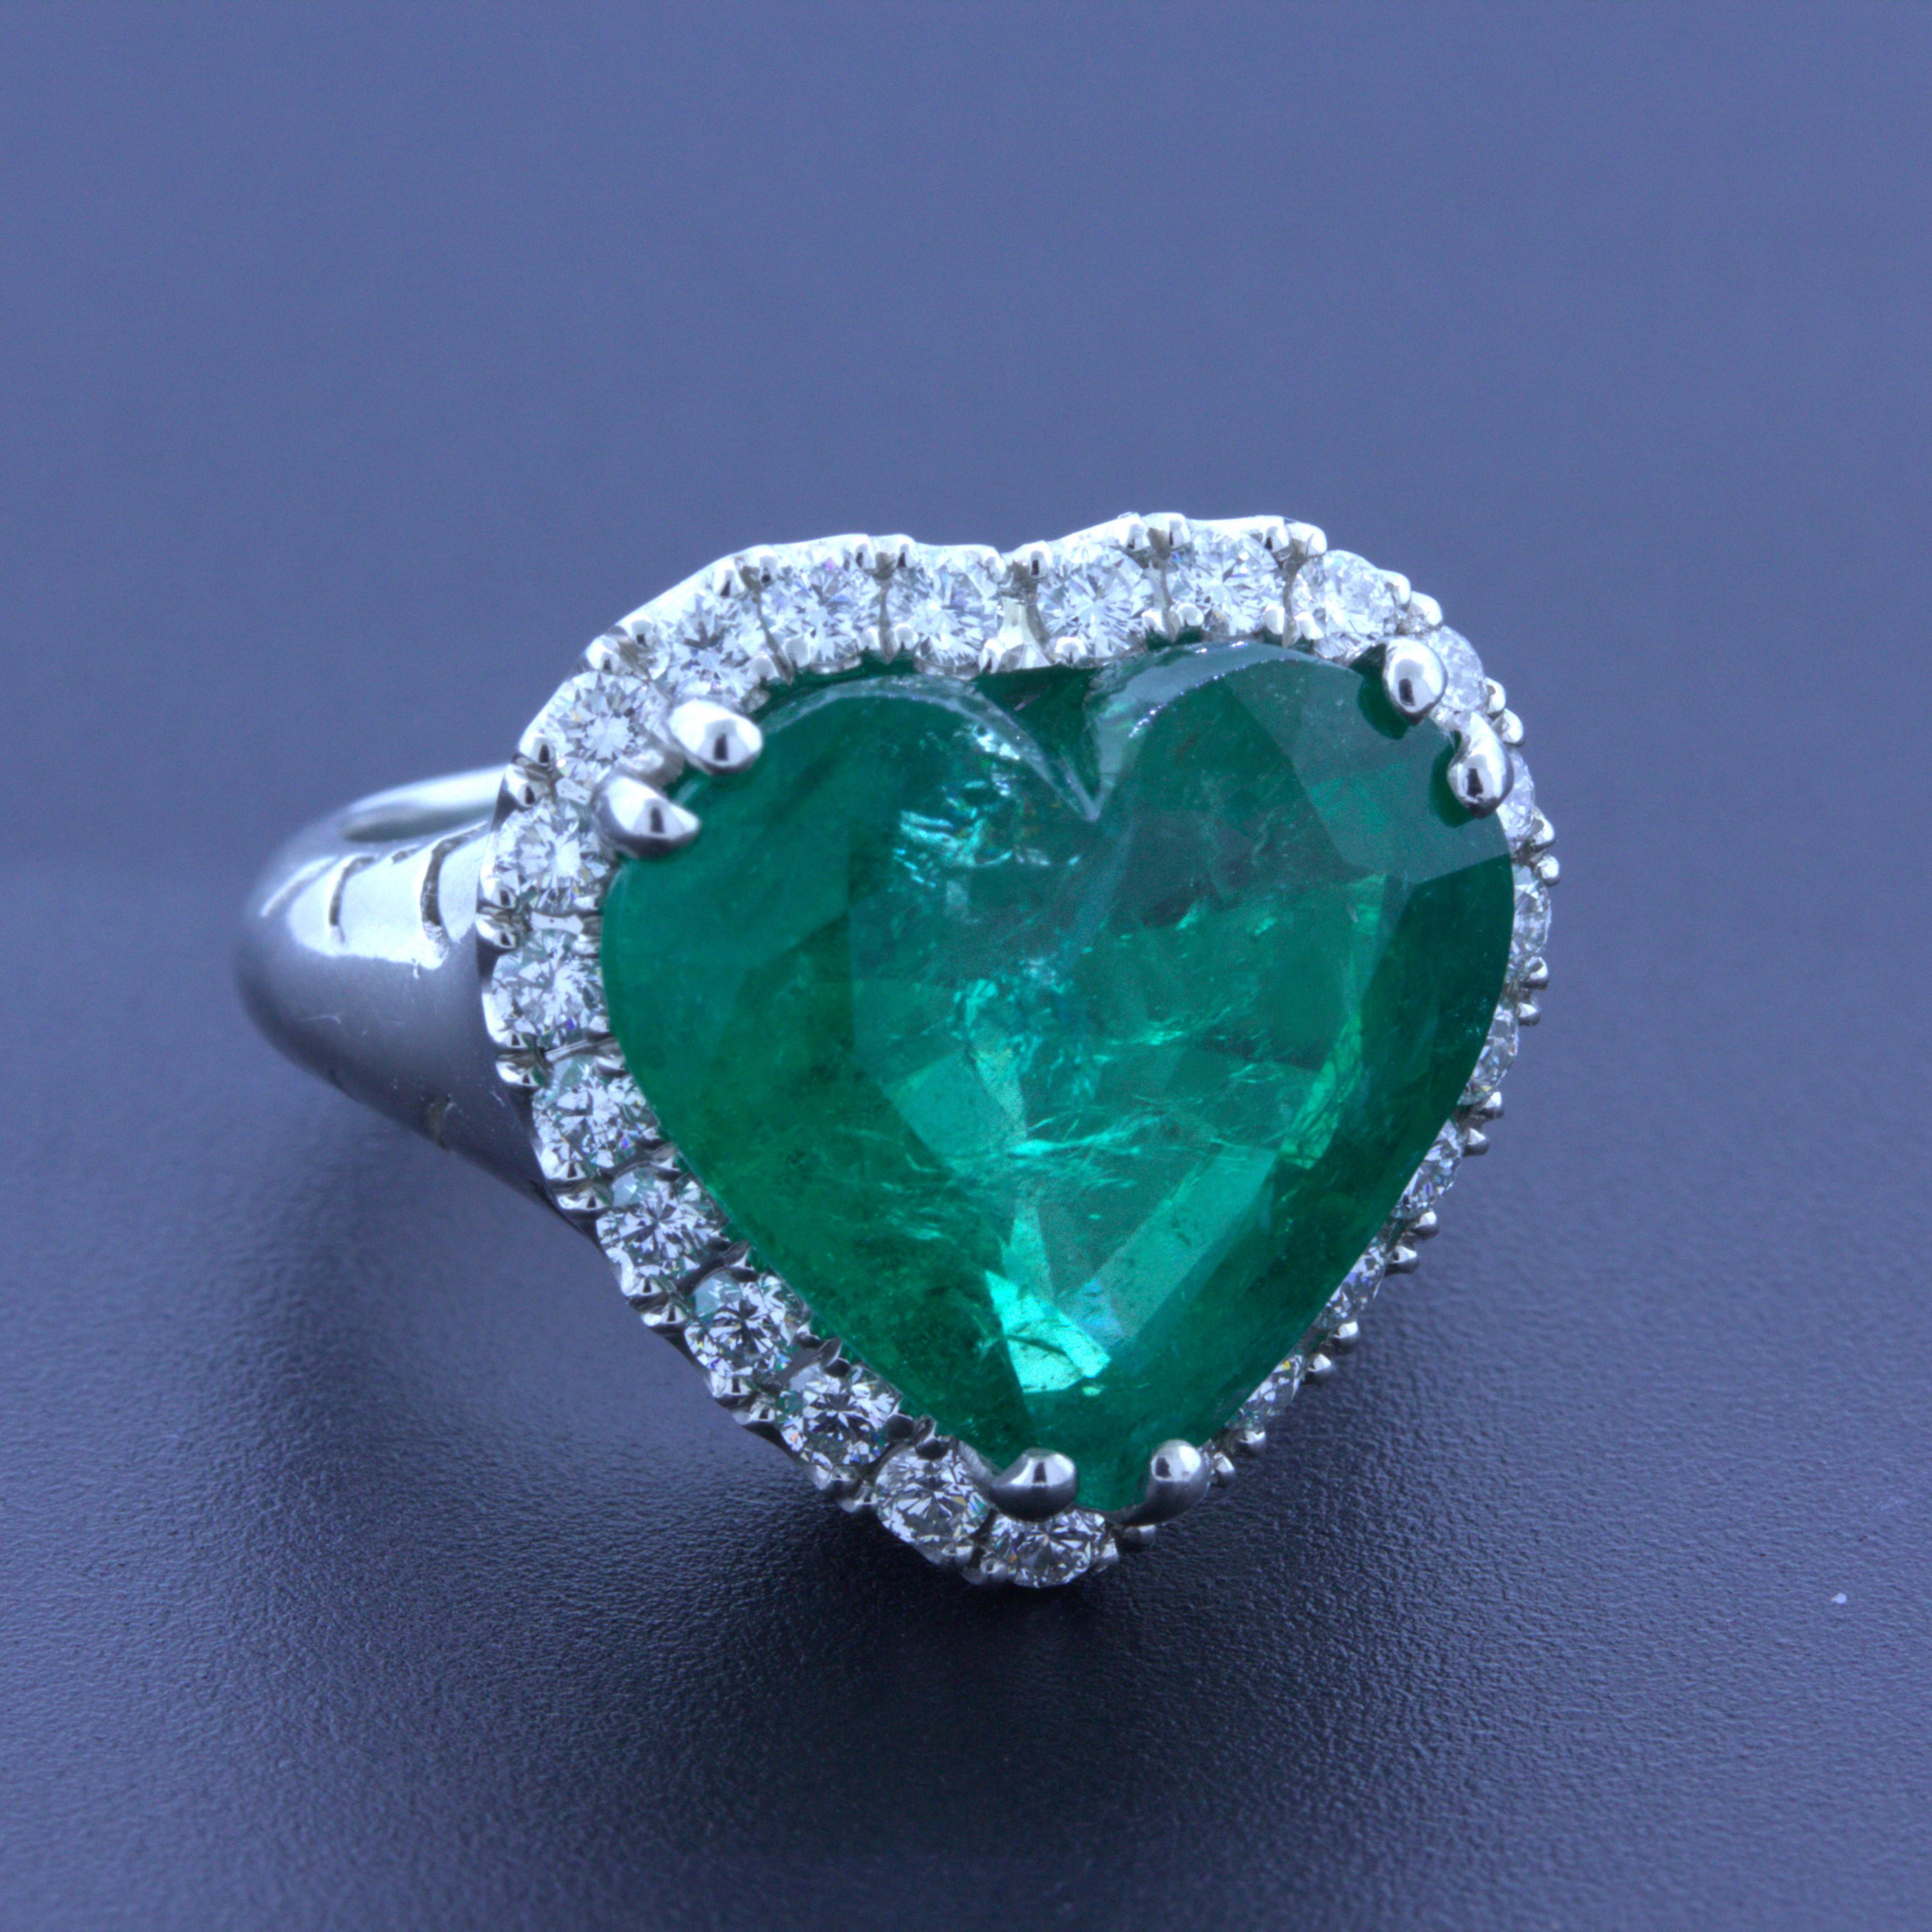 A large and impressive Colombian emerald takes center stage. It weighs 10.40 carats and has a unique heart-shape which is rarely seen in fine material like this. The emerald has a rich and bright grass green color that glows in the light. To find a